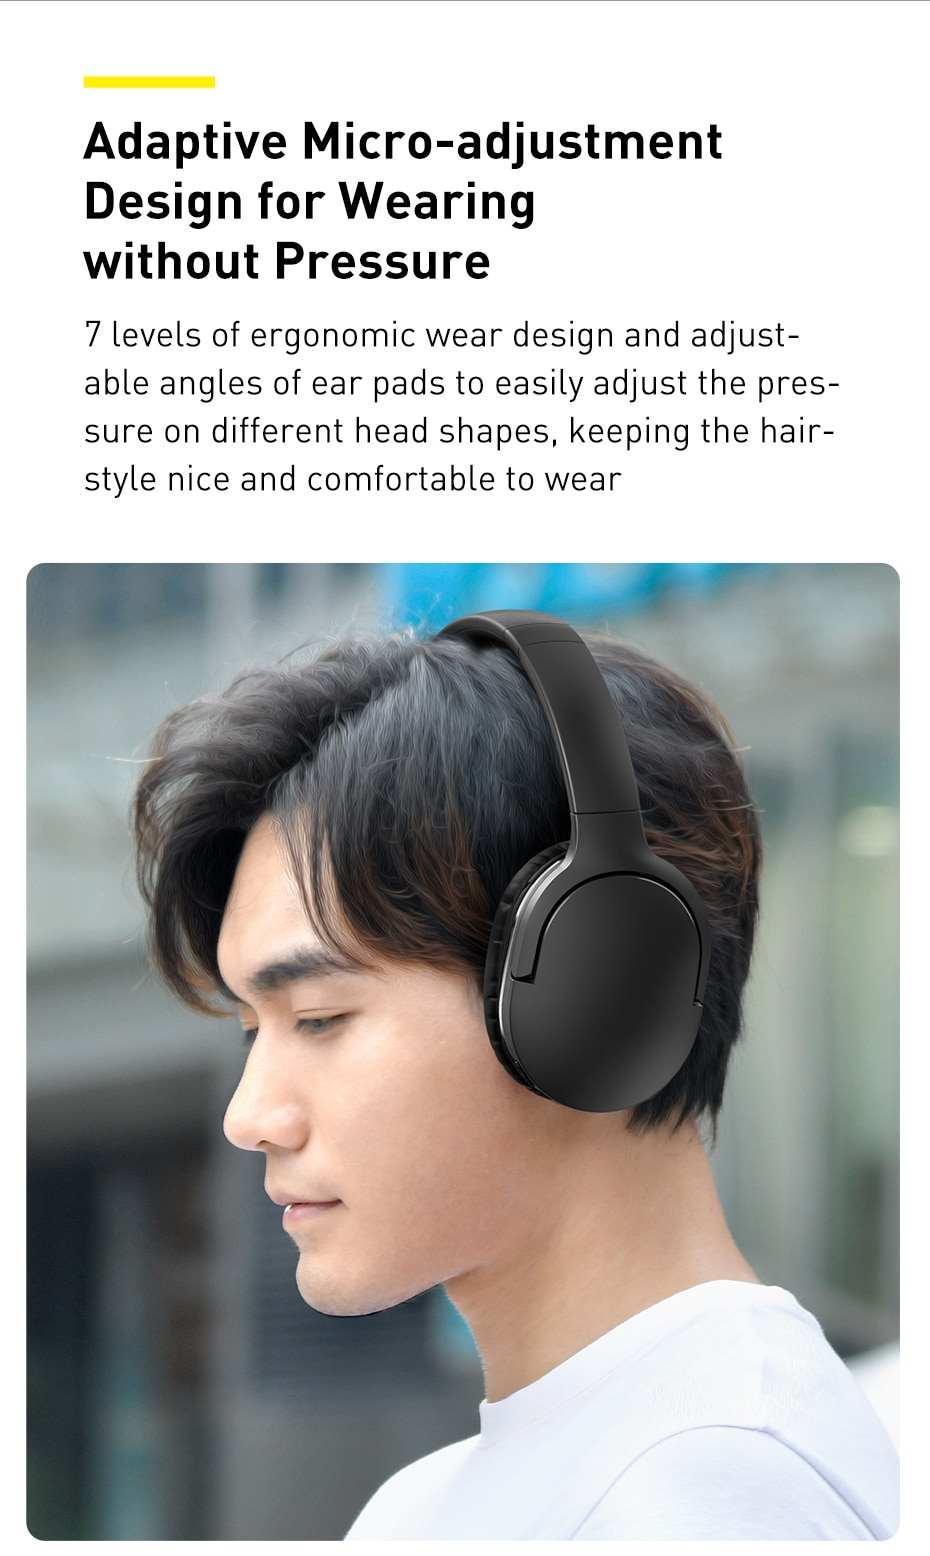 baseus encok d02 pro dual mode bluetooth v5.3 wireless and wired hifi foldable headphones